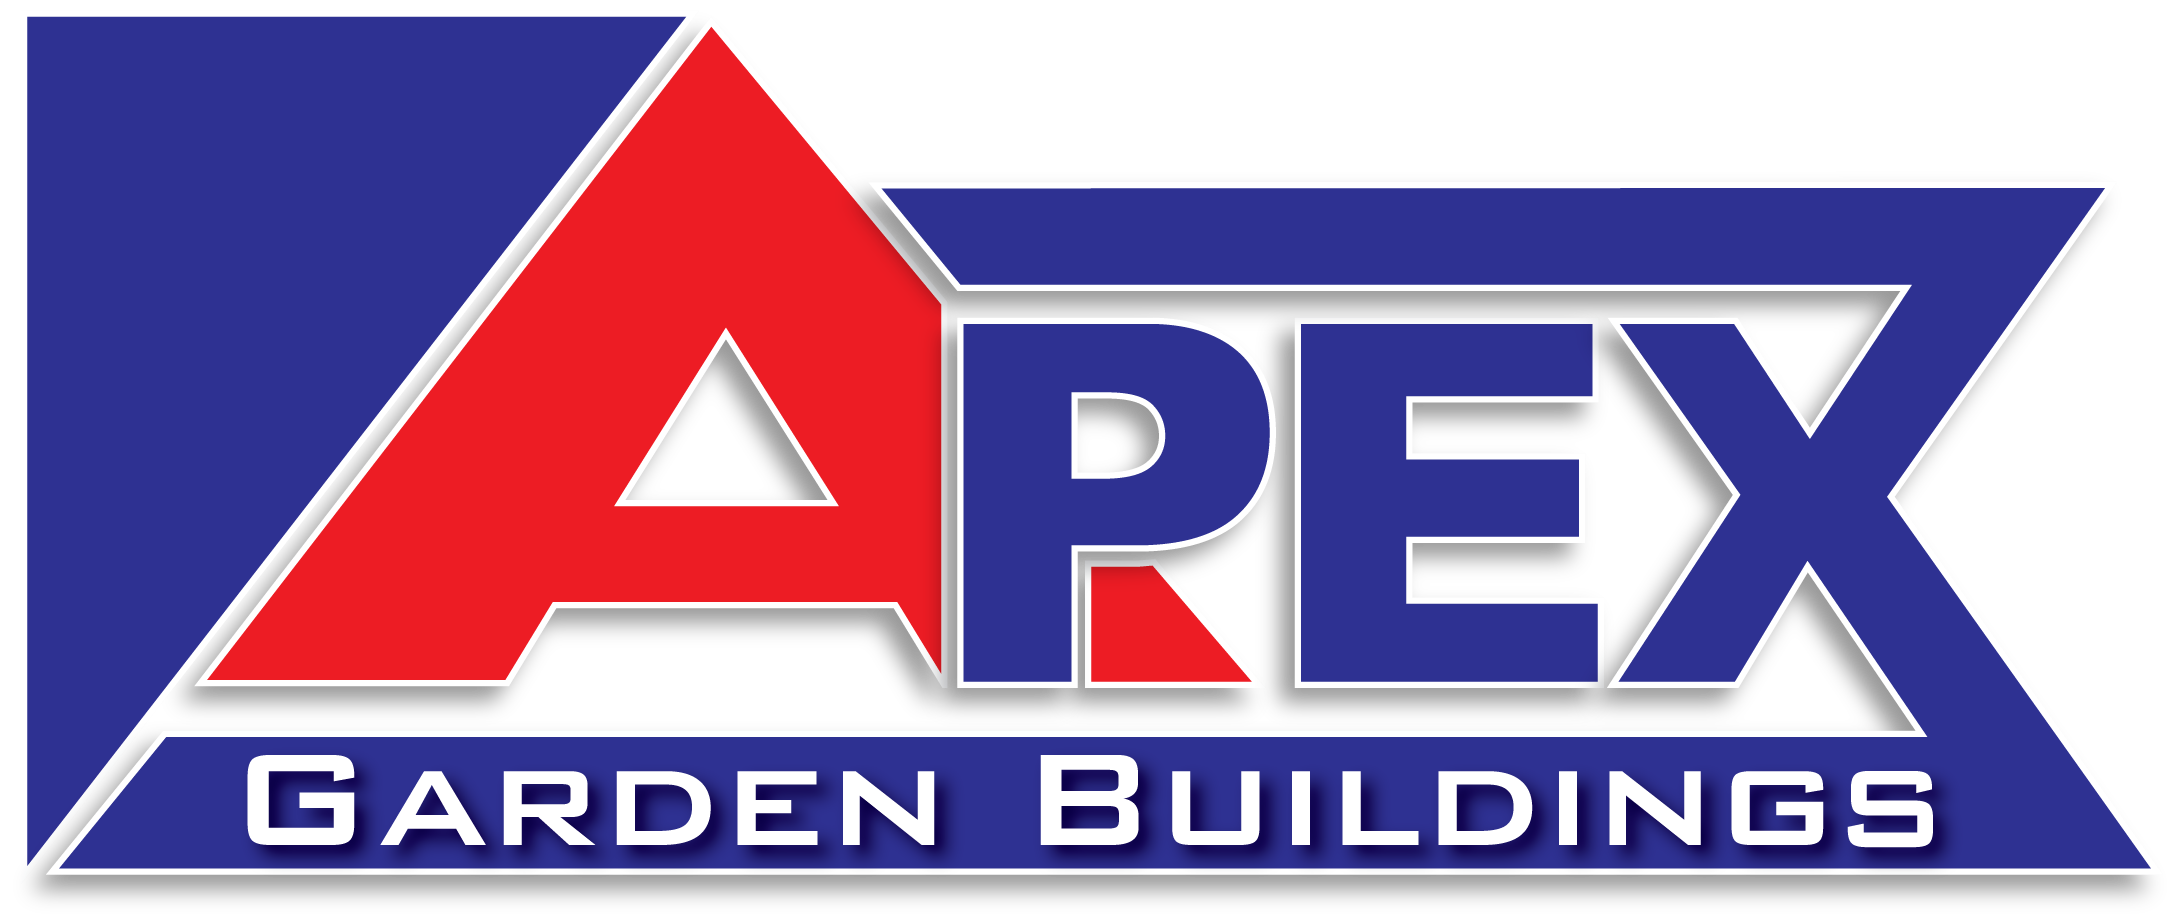 Apex Garden Buildings, proud to be supporting Hardie Race Promotions